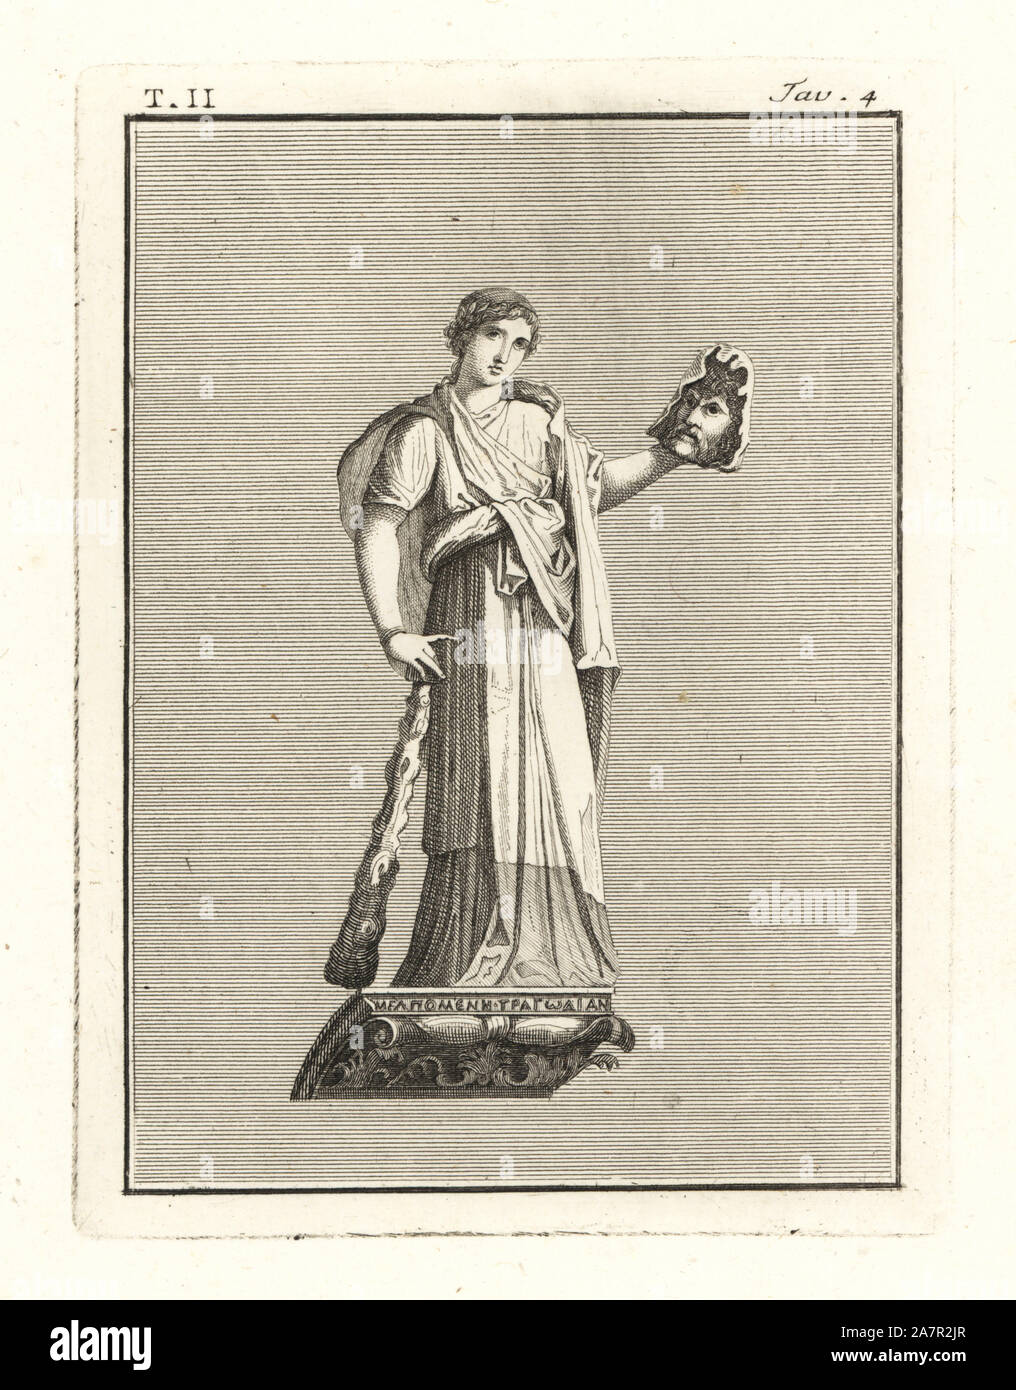 Melpomene, Roman muse of tragedy, holding a tragic mask and club. She wears a veil and narrow band with laurel wreath. Copperplate engraving by Tommaso Piroli from his Antiquities of Herculaneum (Antichita di Ercolano), Rome, 1789. Stock Photo